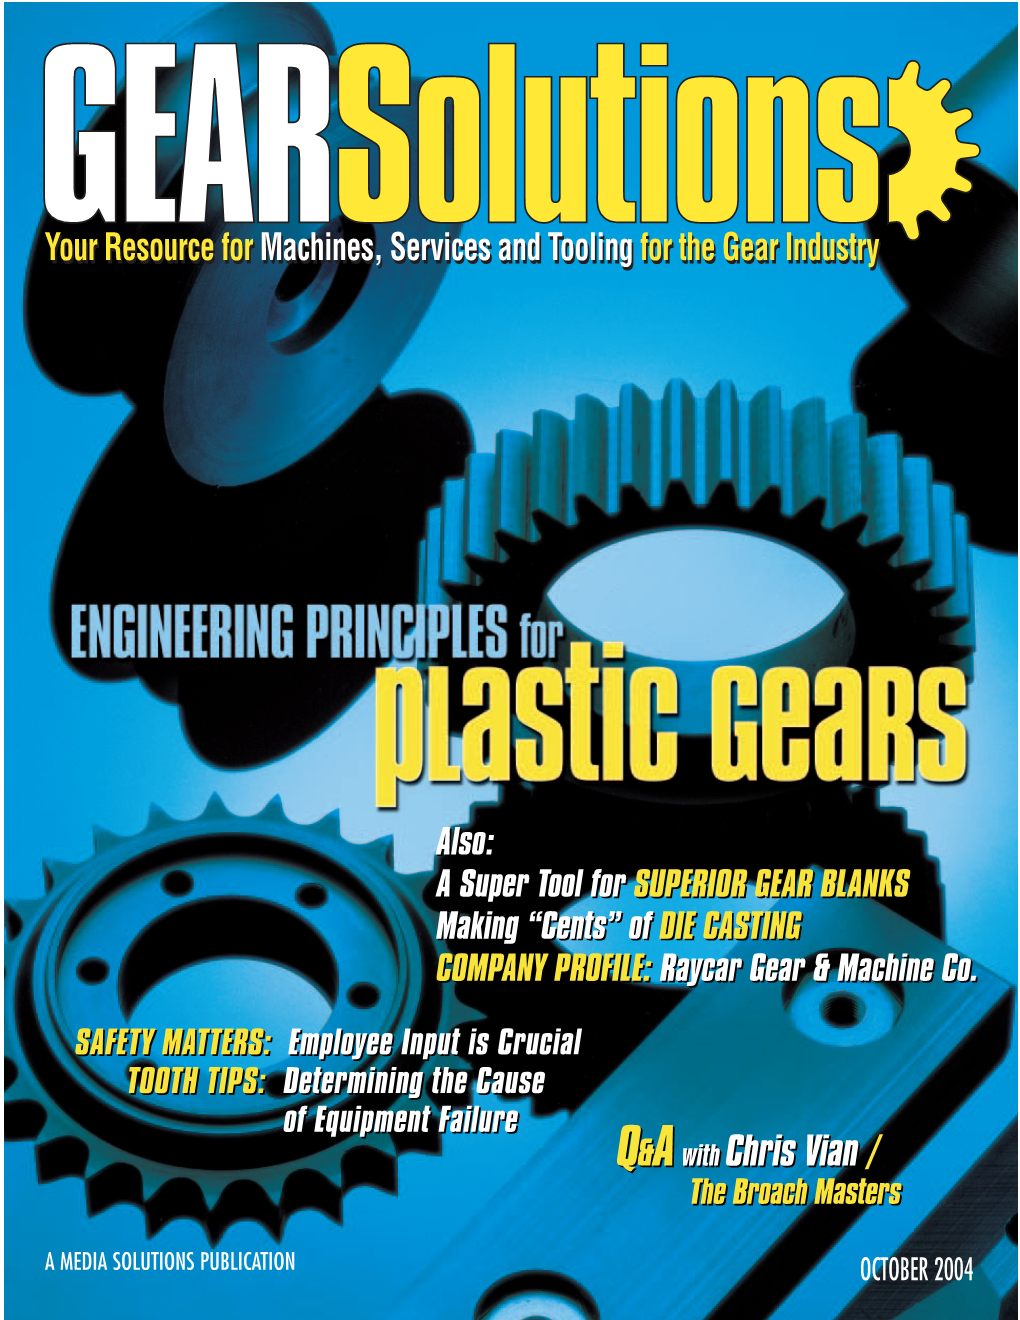 Engineering Principles for Plastic Gears by Rudy Walter in Many Instances, Plastic Materials Perform Markedly Better Than Do Metals—Especially Pg